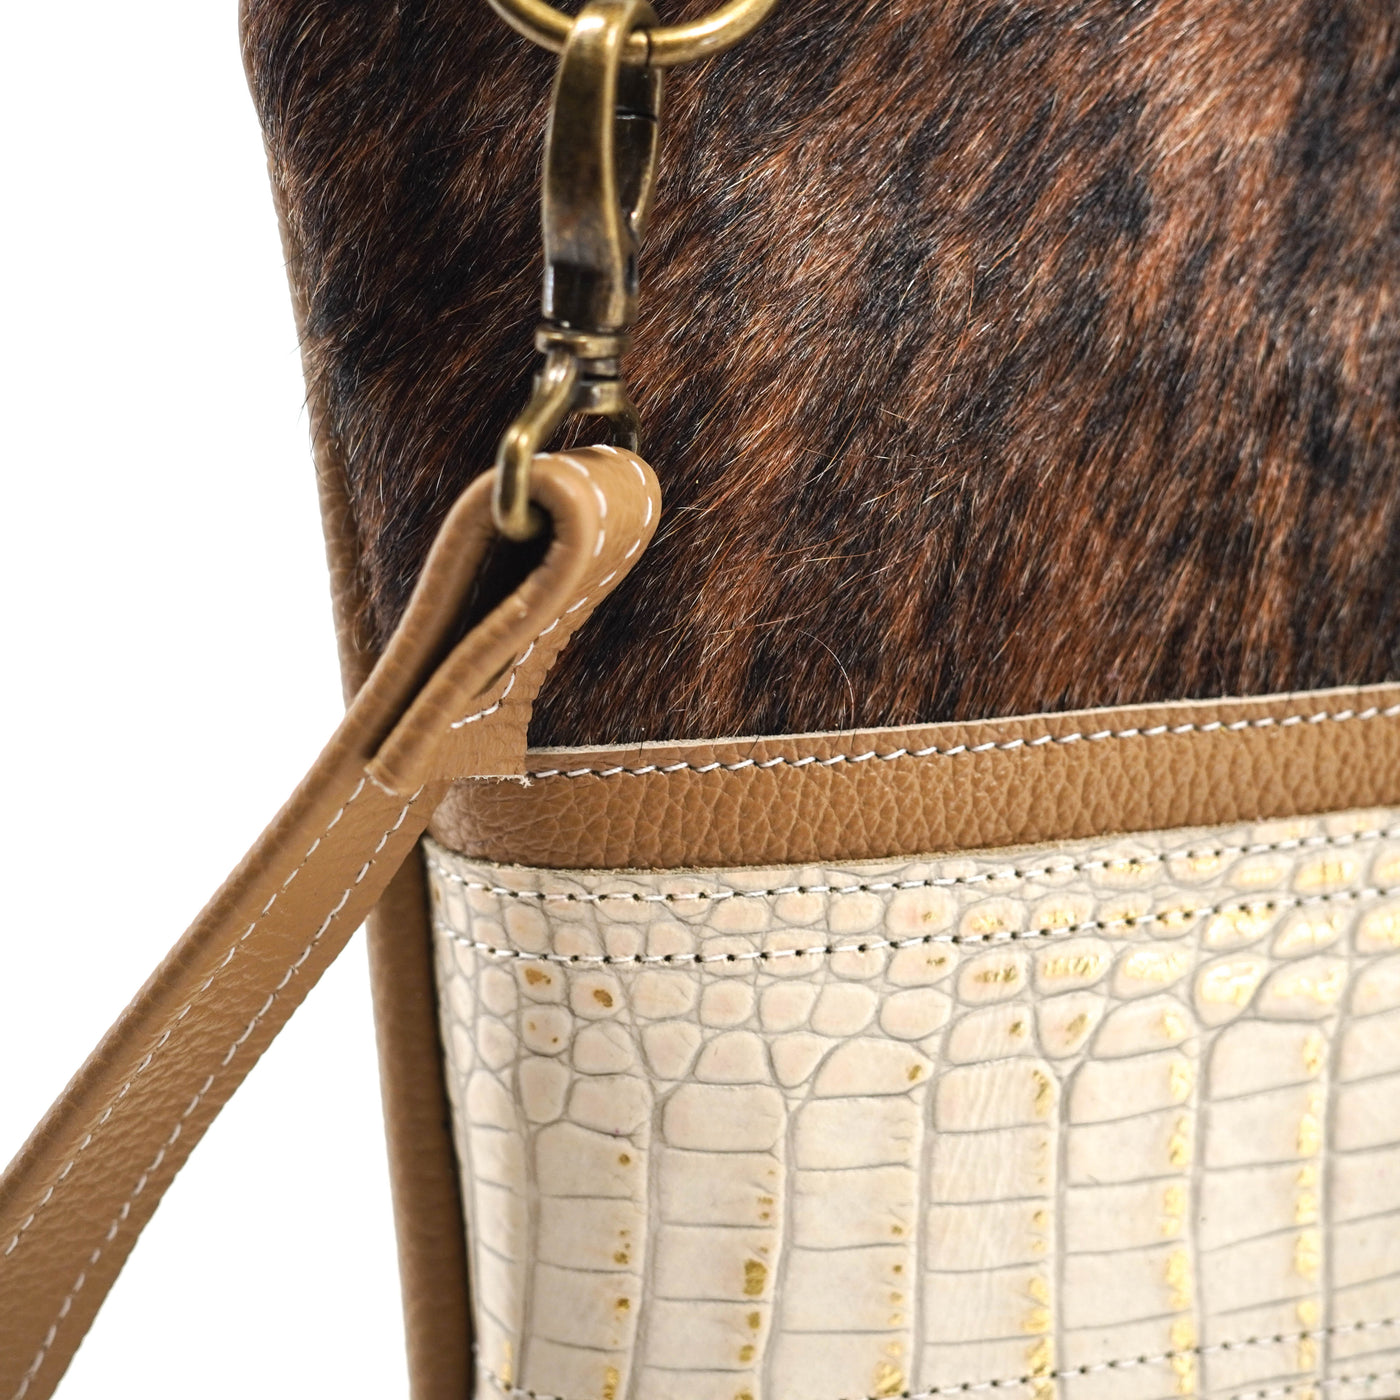 Shania - Two-Tone Brindle w/ Ivory Croc-Shania-Western-Cowhide-Bags-Handmade-Products-Gifts-Dancing Cactus Designs